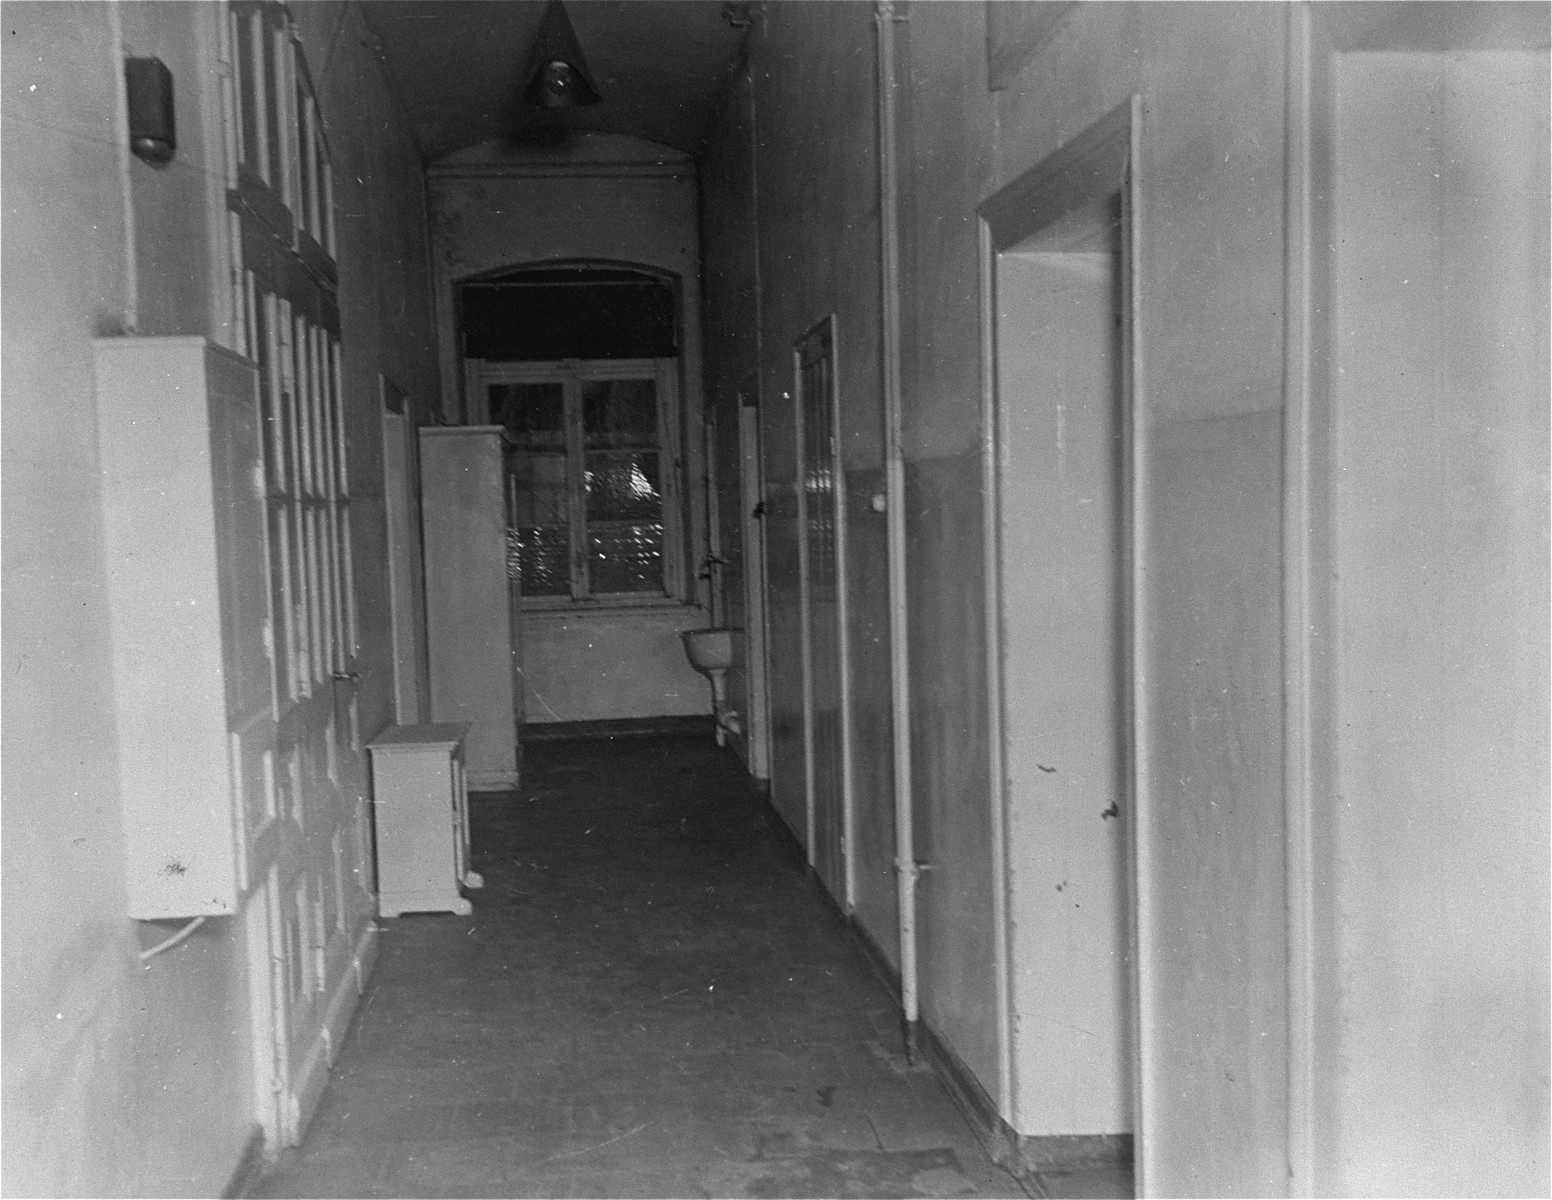 View of a corridor at the Hadamar Institute called "Death Row". 

Victims in rooms leading off this corridor were marked for immediate death. The photograph was taken by an American military photographer soon after the liberation.